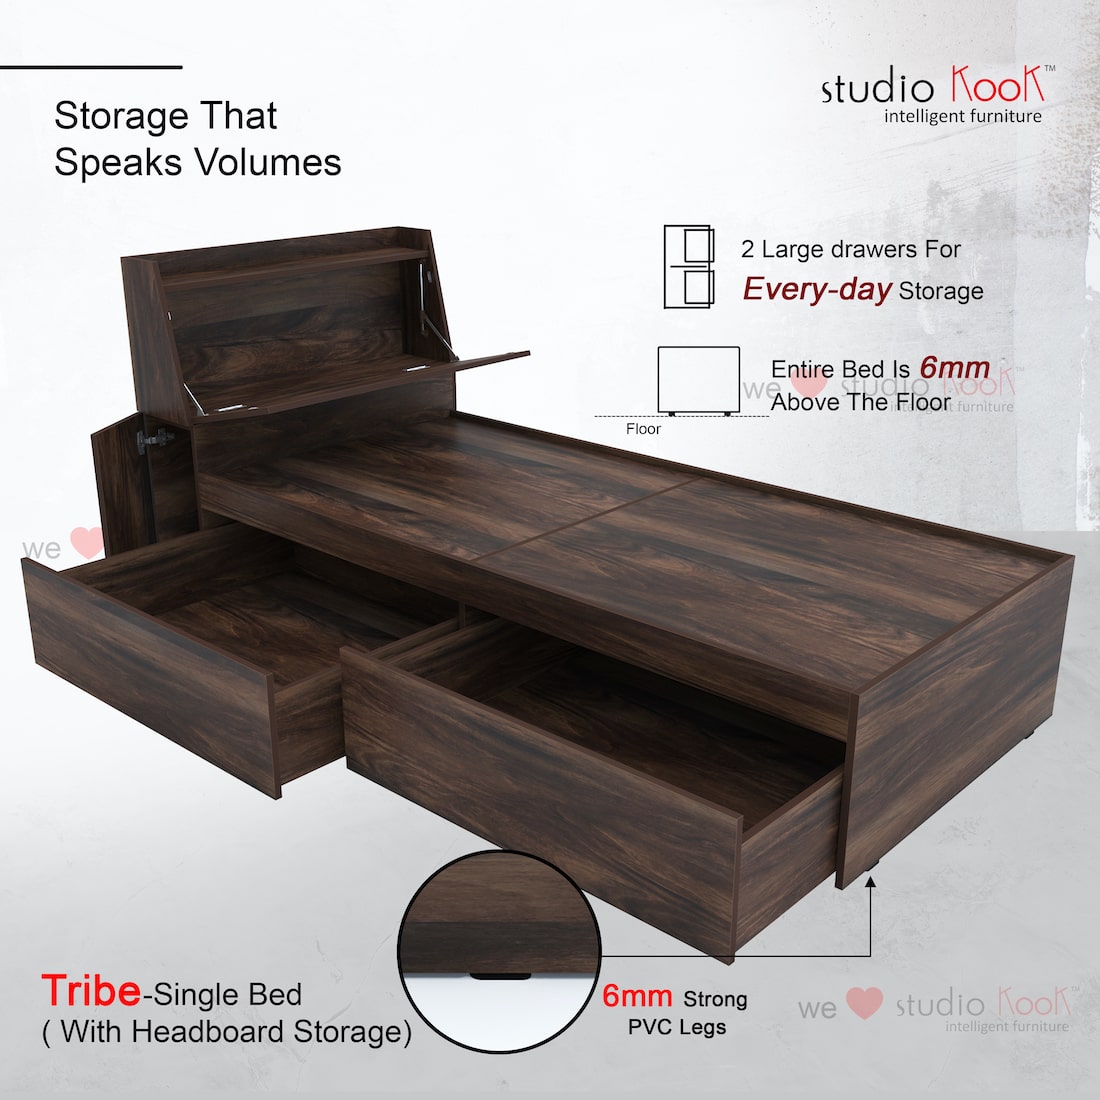 Tribe Single Bed Left with Headboard storage and 2 Drawers on Left